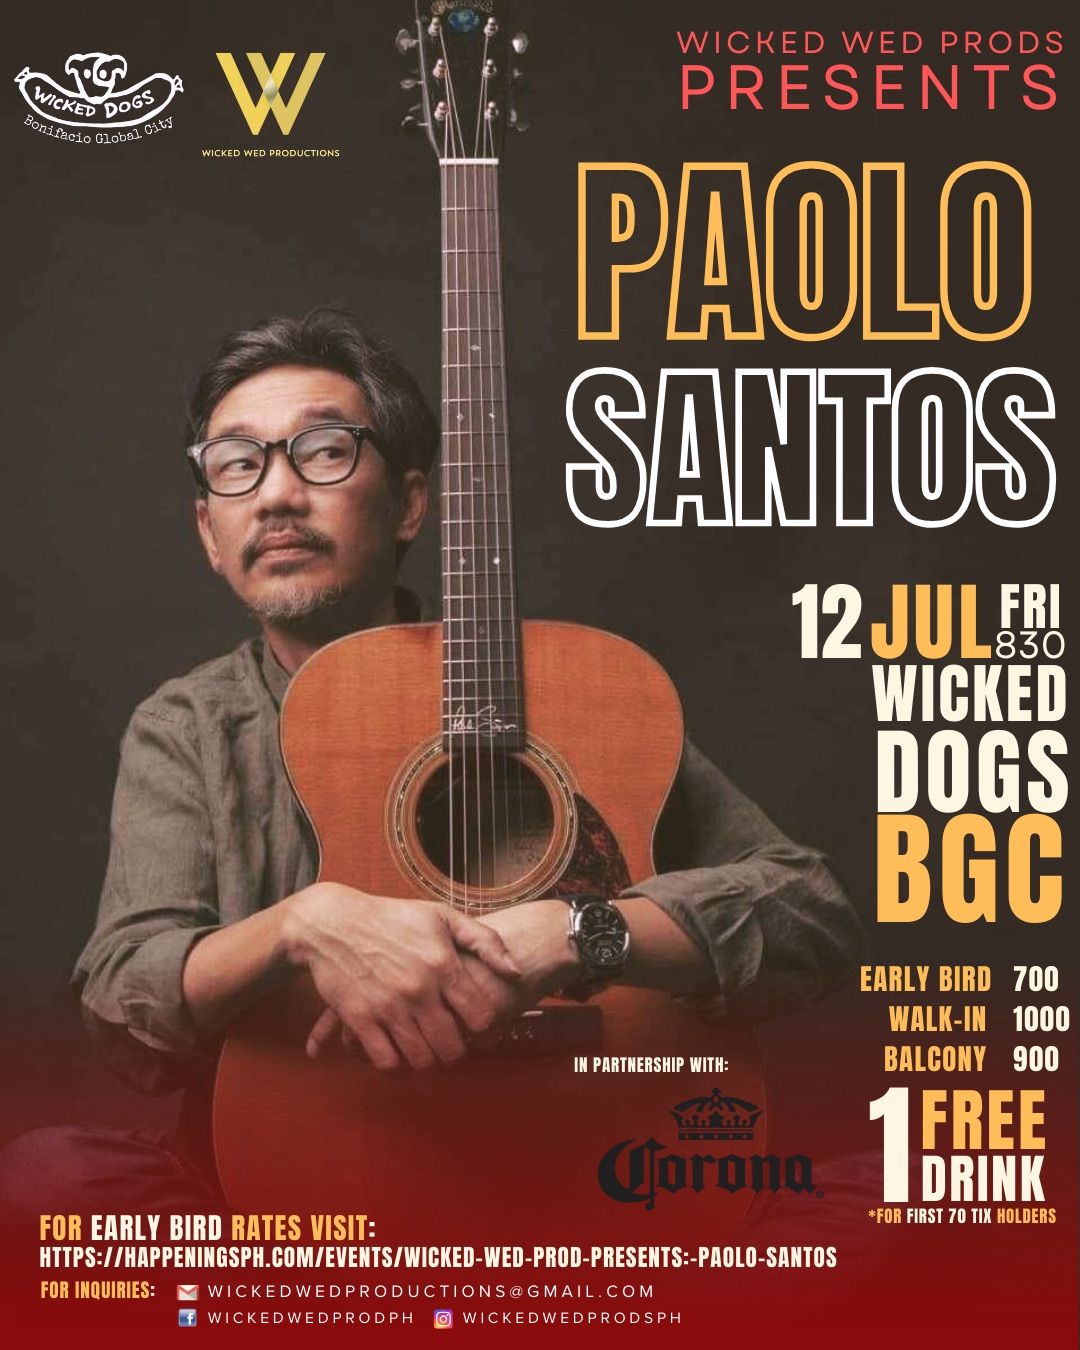 Wicked Wed Prod Presents: PAOLO SANTOS